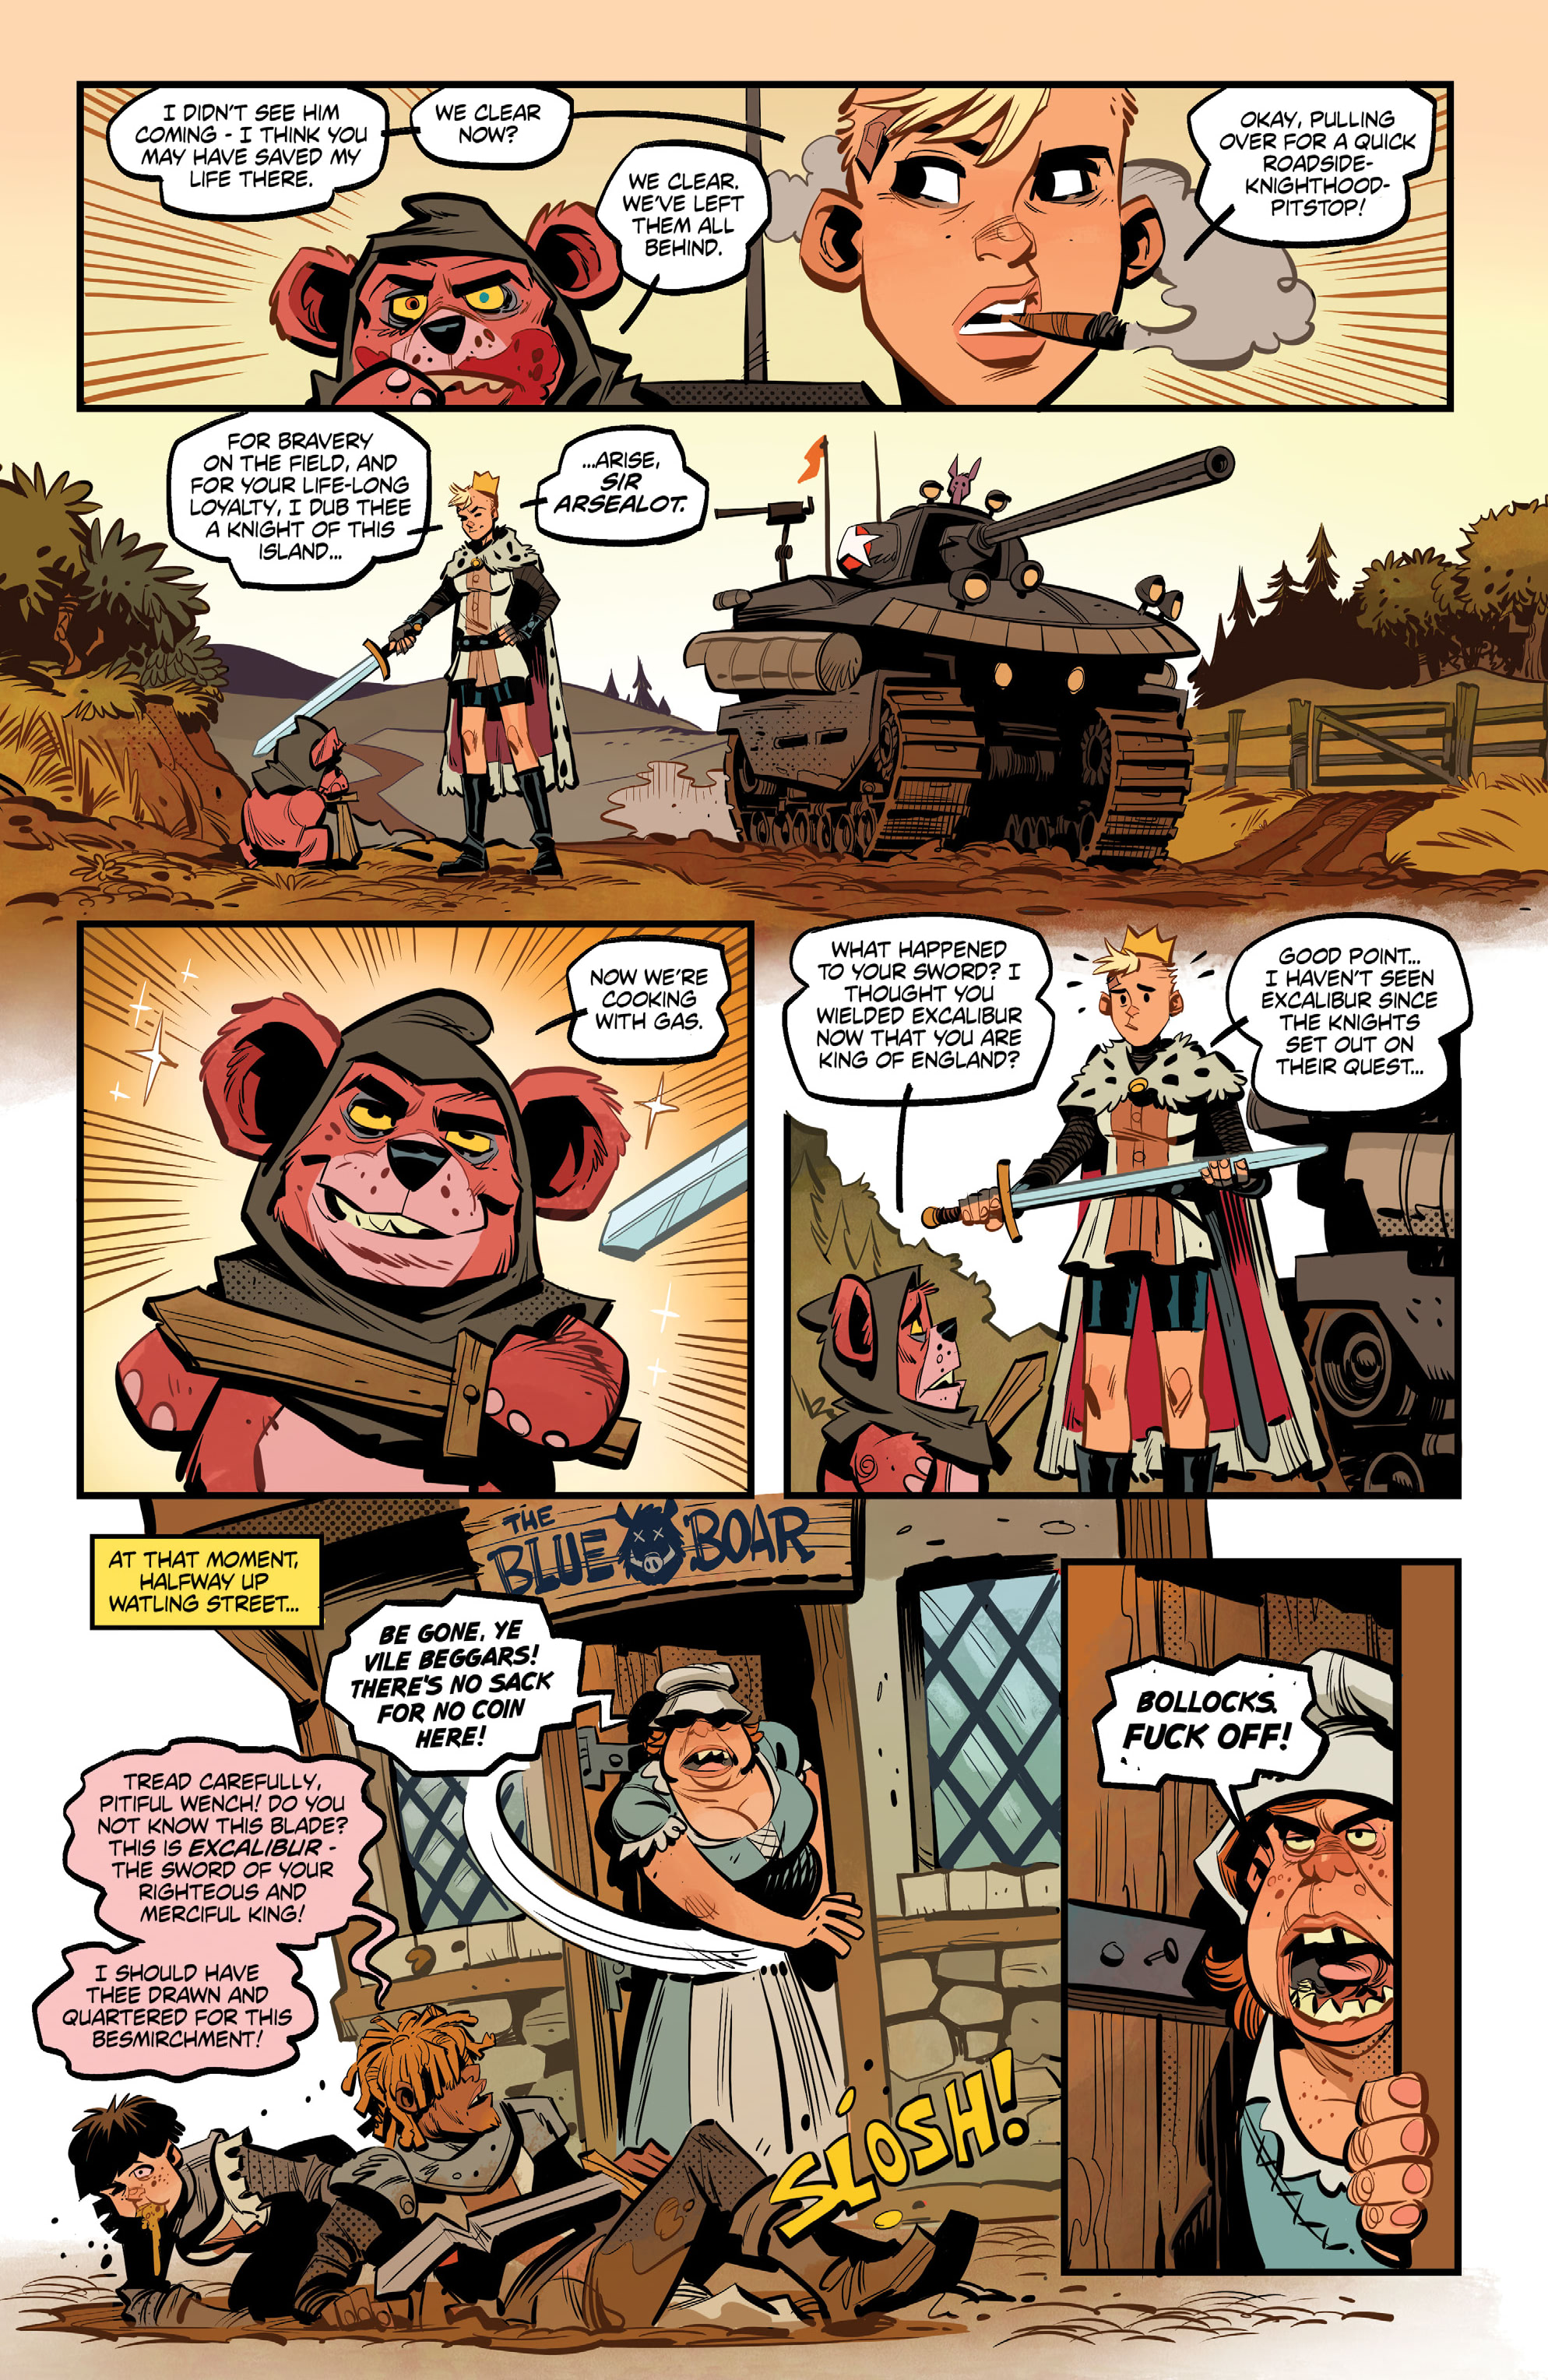 King Tank Girl 2020 Chapter 2 Page 1 6017